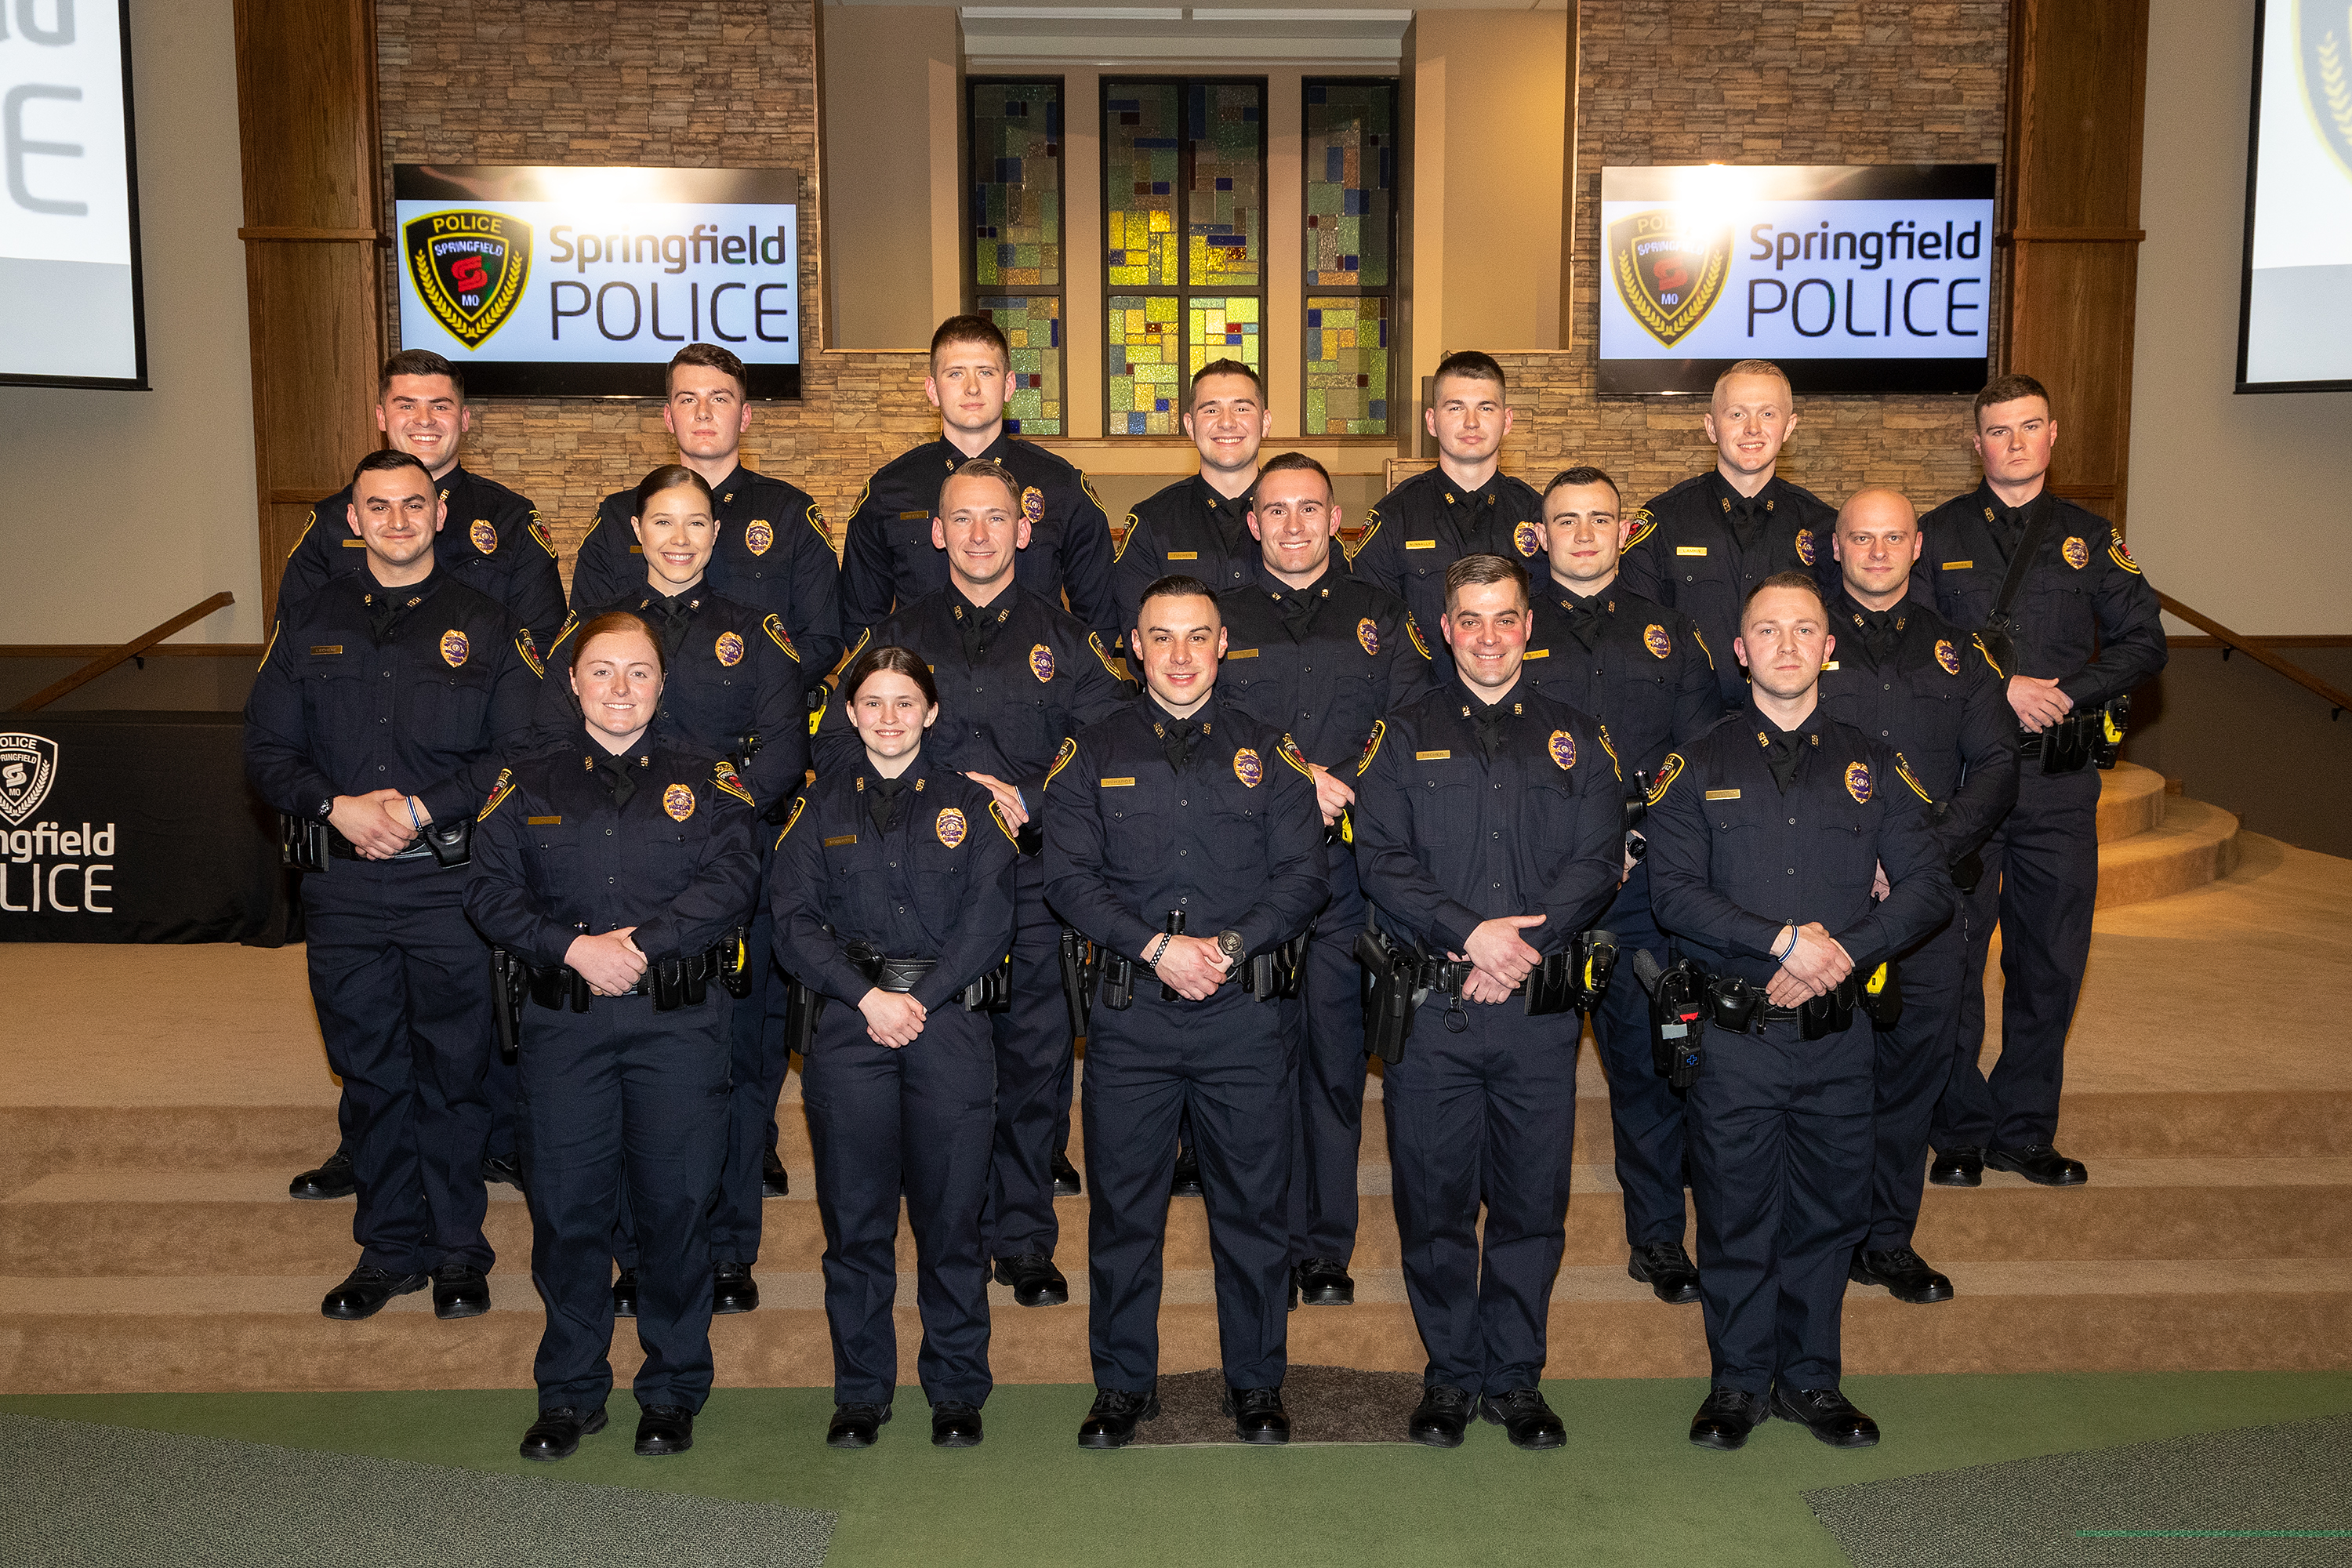 A group of 18 new police officers pose in three rows for a photo